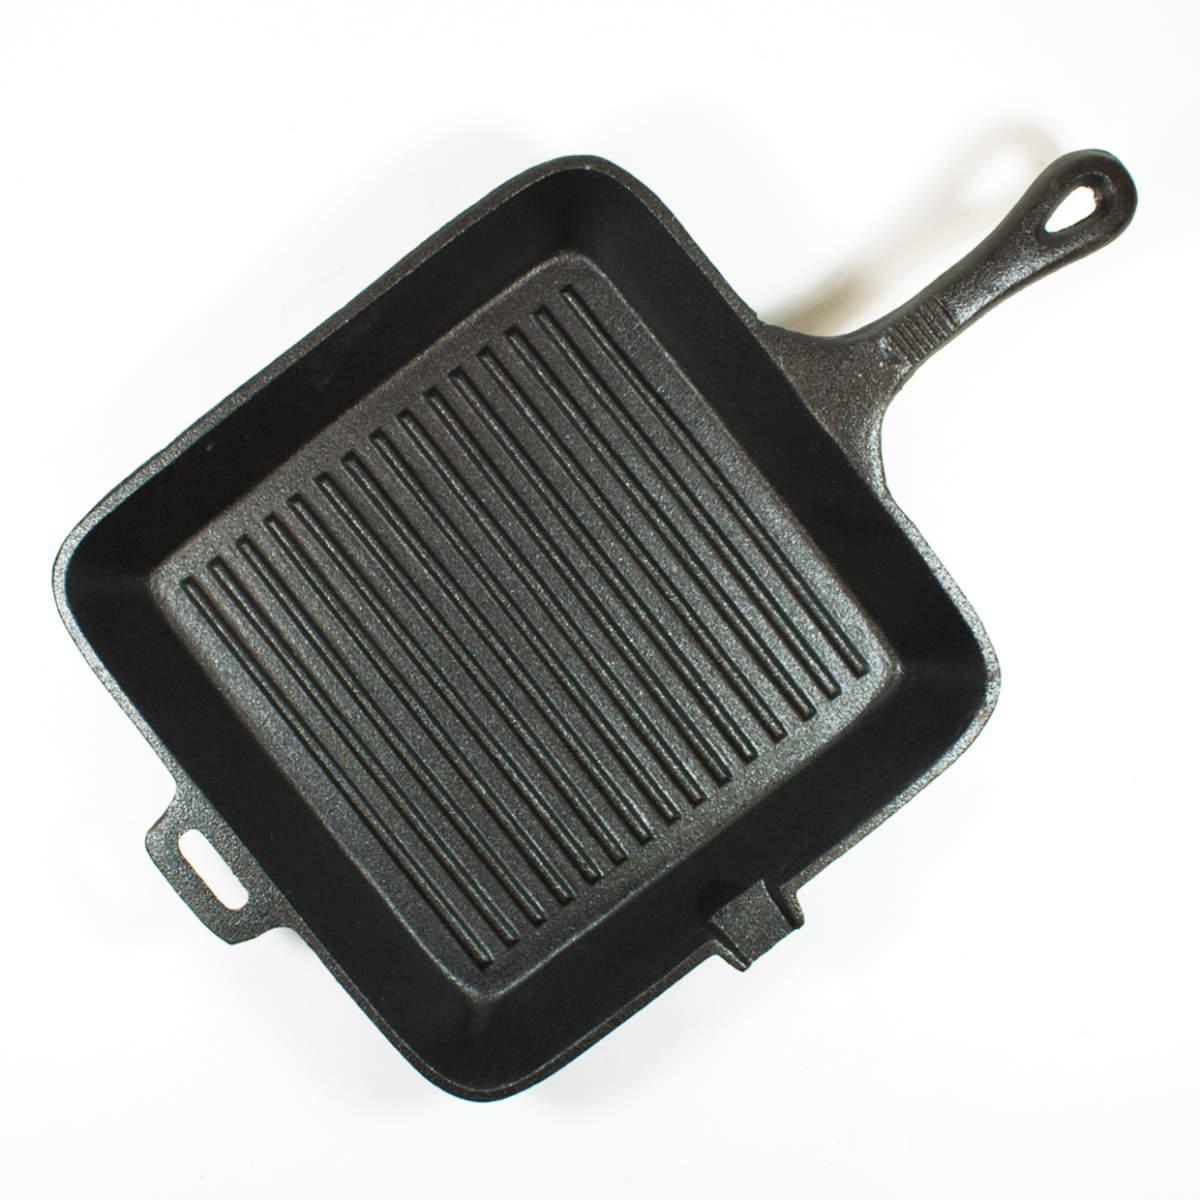 https://www.dutchcountrygeneralstore.com/wp-content/uploads/2017/02/CAST-IRON-SQUARE-GRILL-PAN-WITH-ASST.-HANDLE-10.5X1.75-by-OLD-MOUNTAIN-LLC.jpg